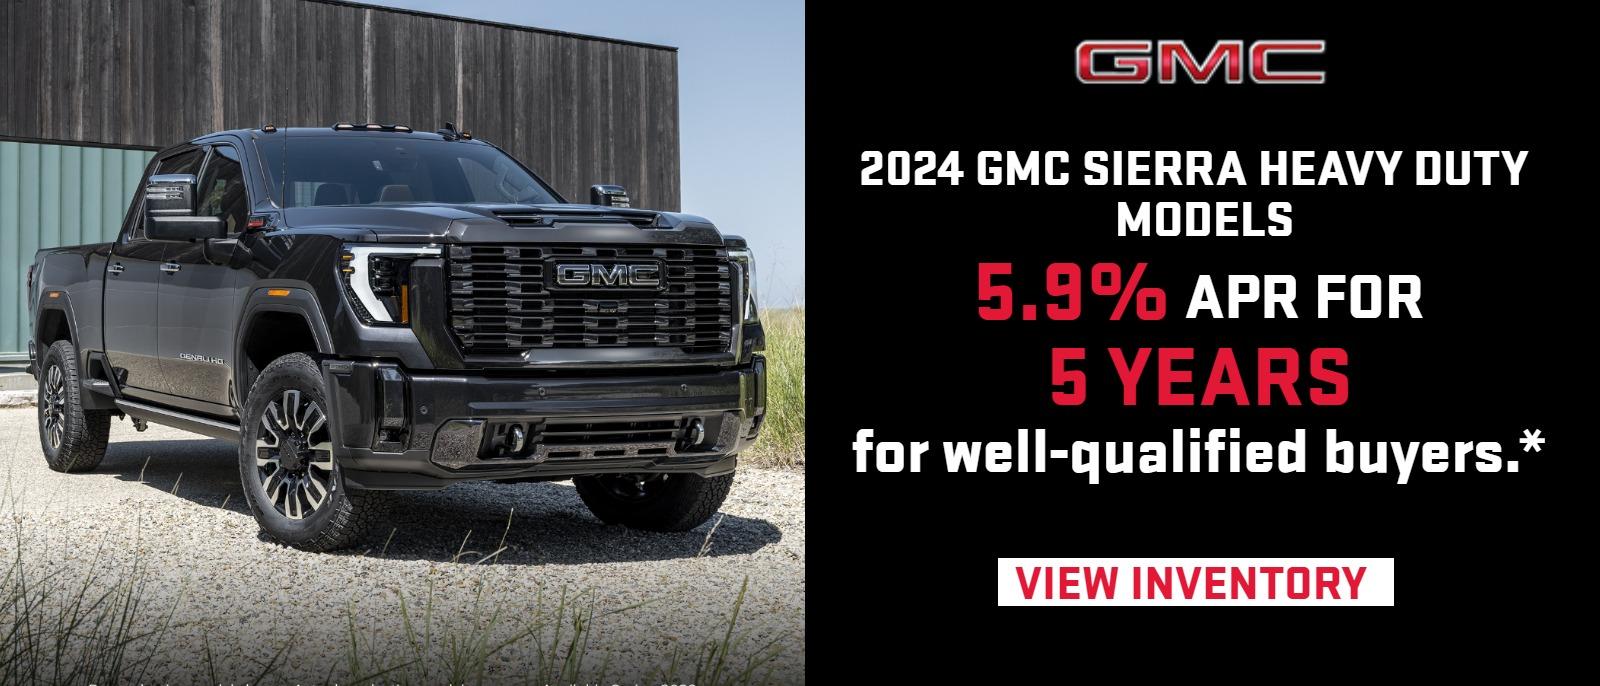 2024 GMC SIERRA HEAVY DUTY MODELS
5.9% APR FOR 5 YEARS for well-qualified buyers.*